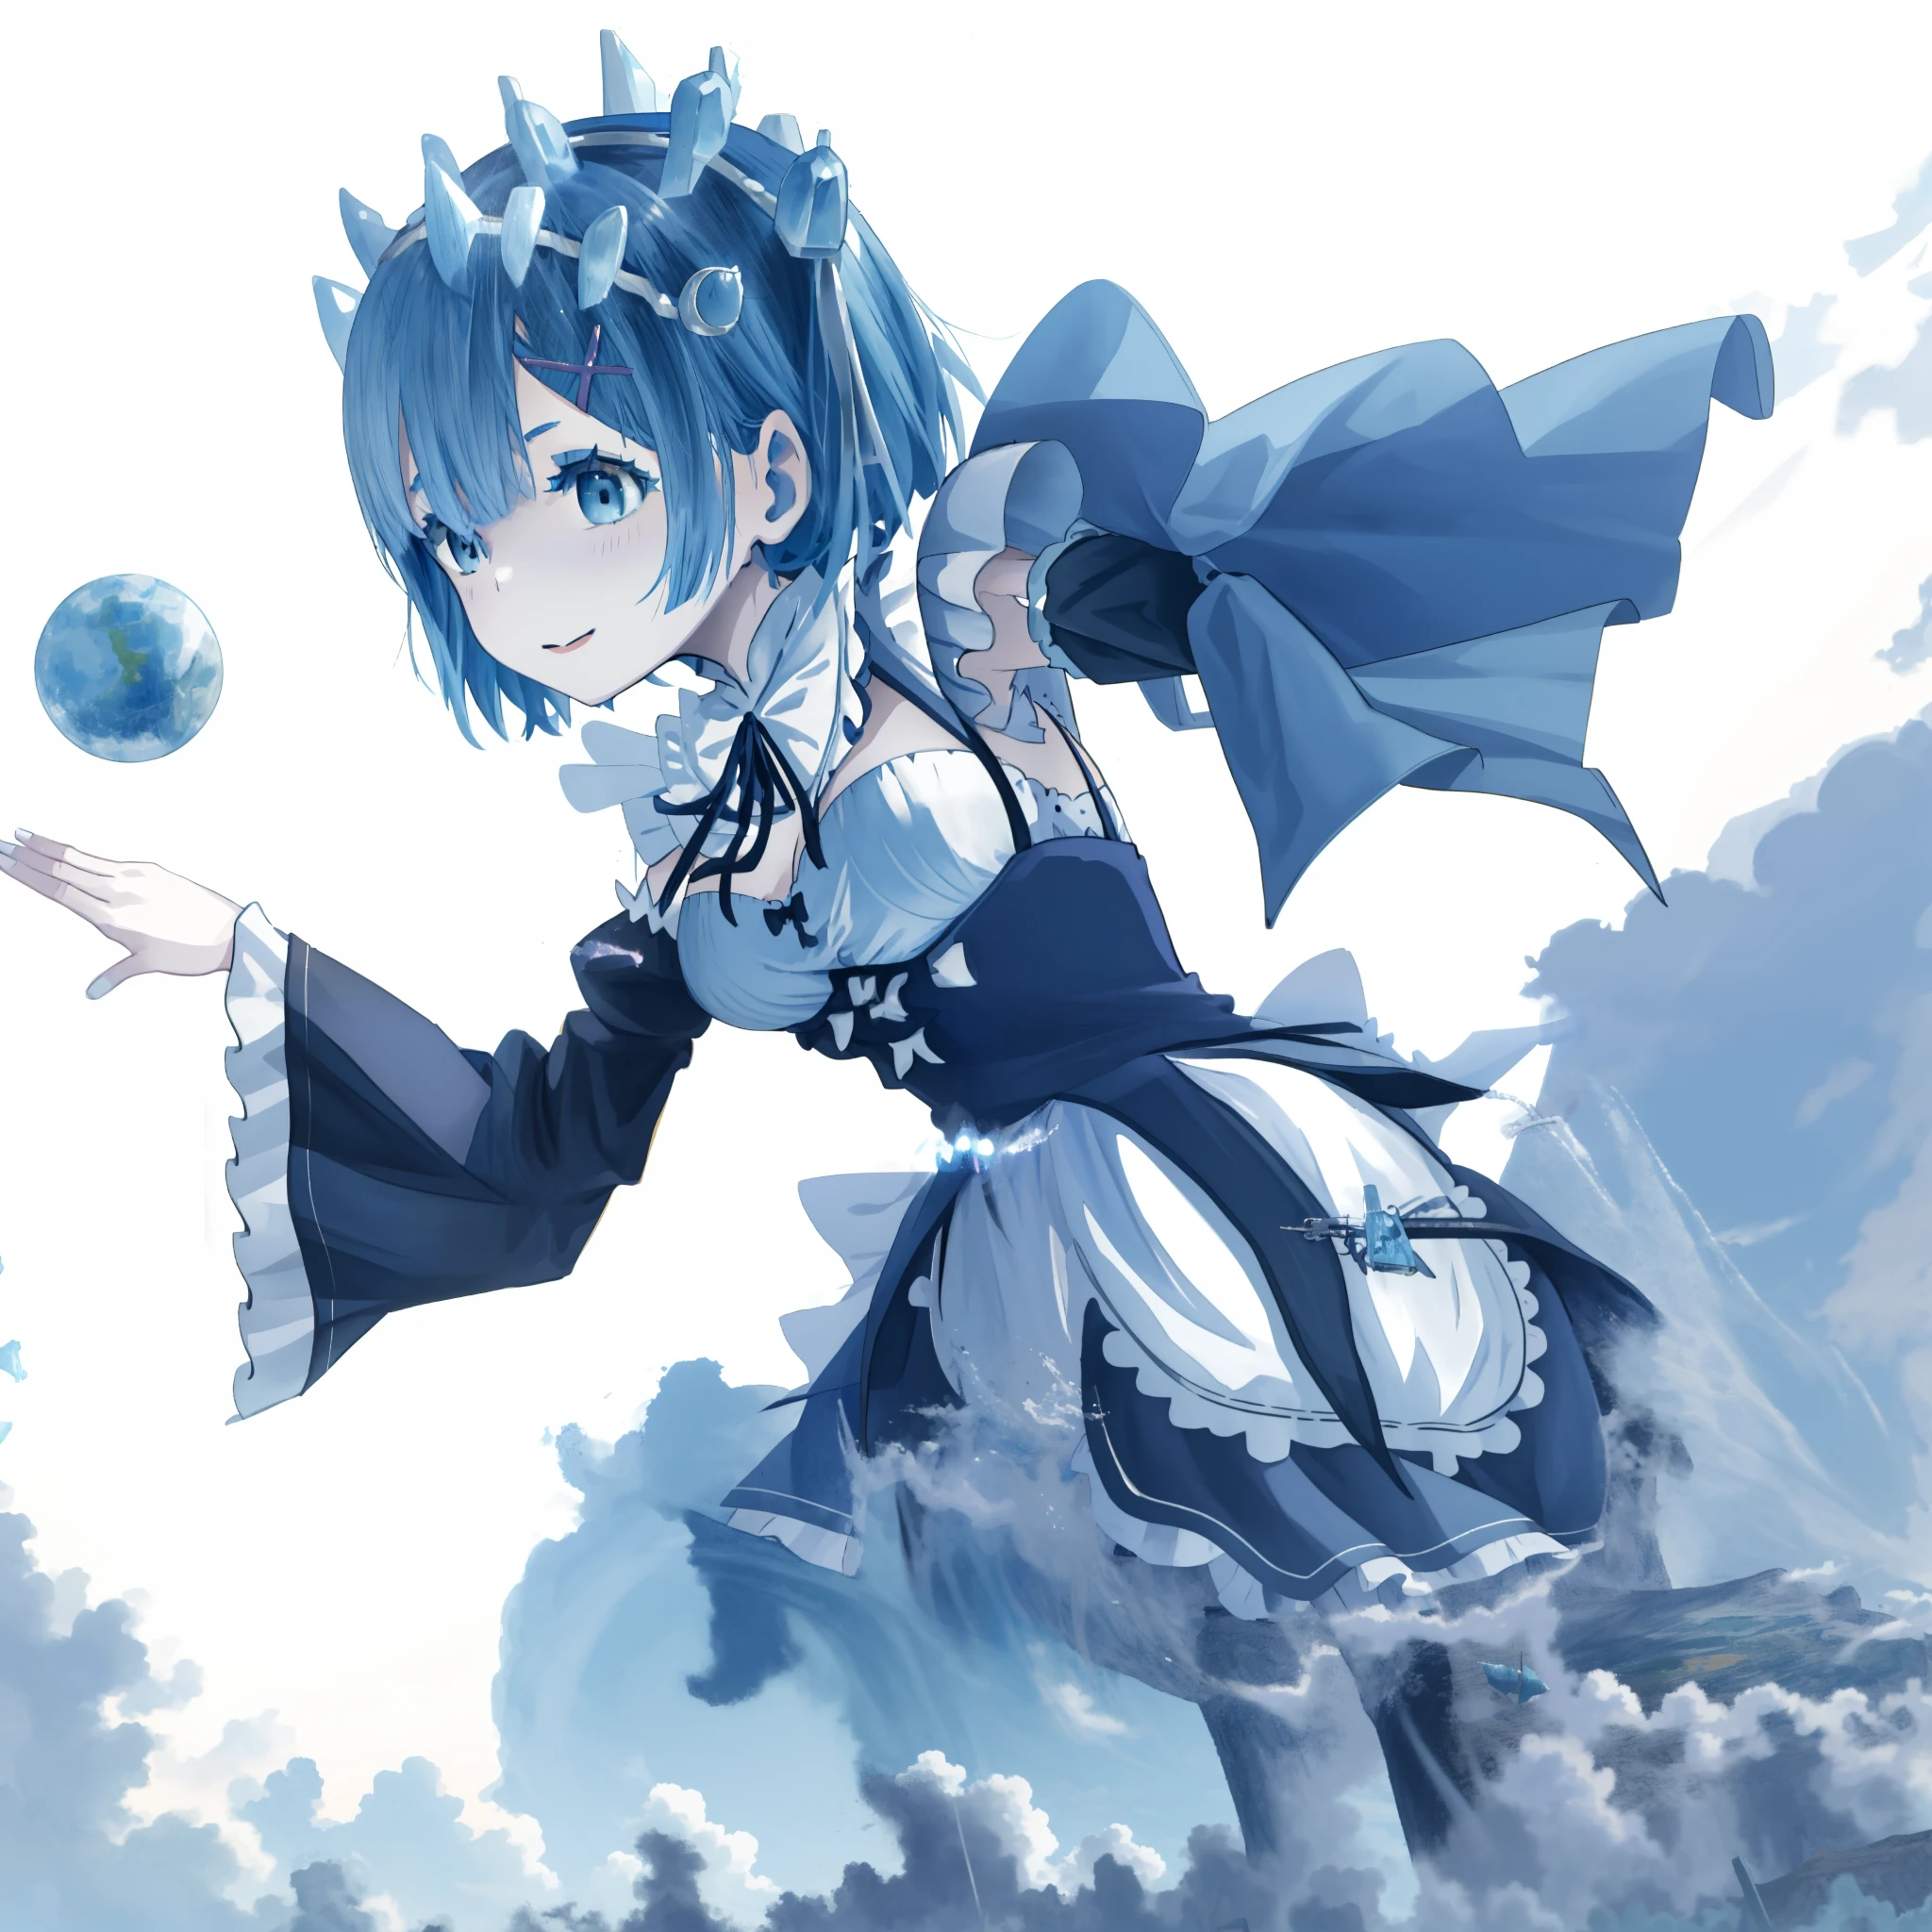 Anime girl with blue hair and black and white costume, Rem Rezero, loli in dress, small curvaceous , rimuru, Anime moe art style, [[[[grinning evily]]]], , cute anime waifu in a nice dress, tsuaii, Blue woman with long hair, rimuru tempest, ayanami, maid，eye glass